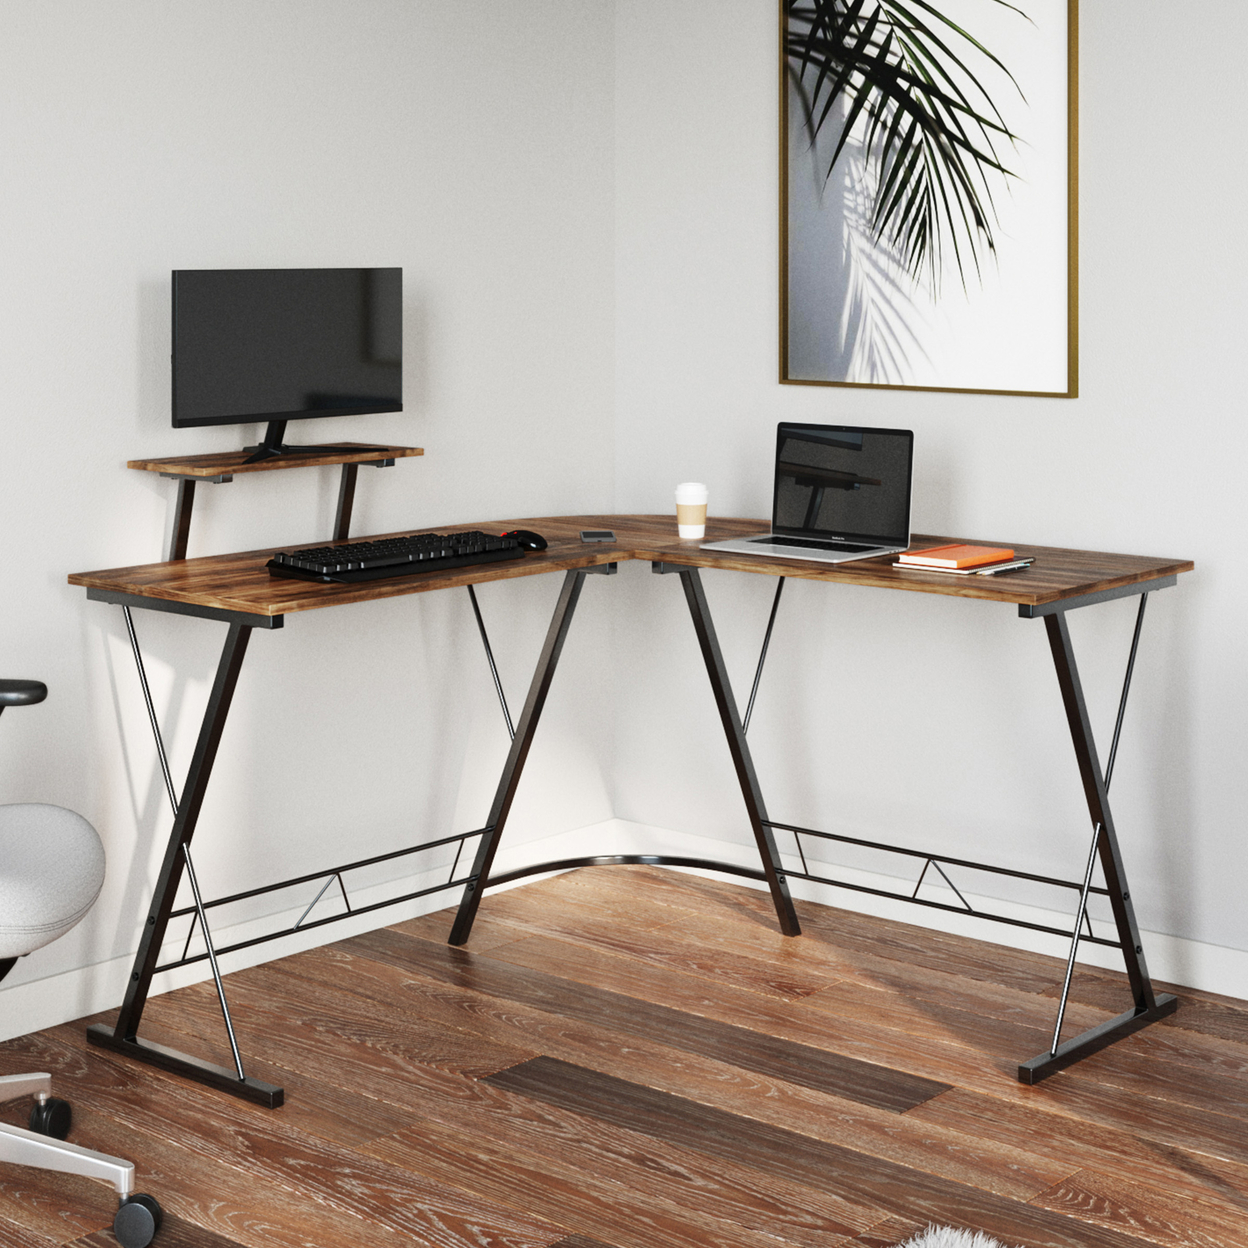 L Shaped Computer Desk With Monitor Stand Modern Industrial Style, Rustic Brown